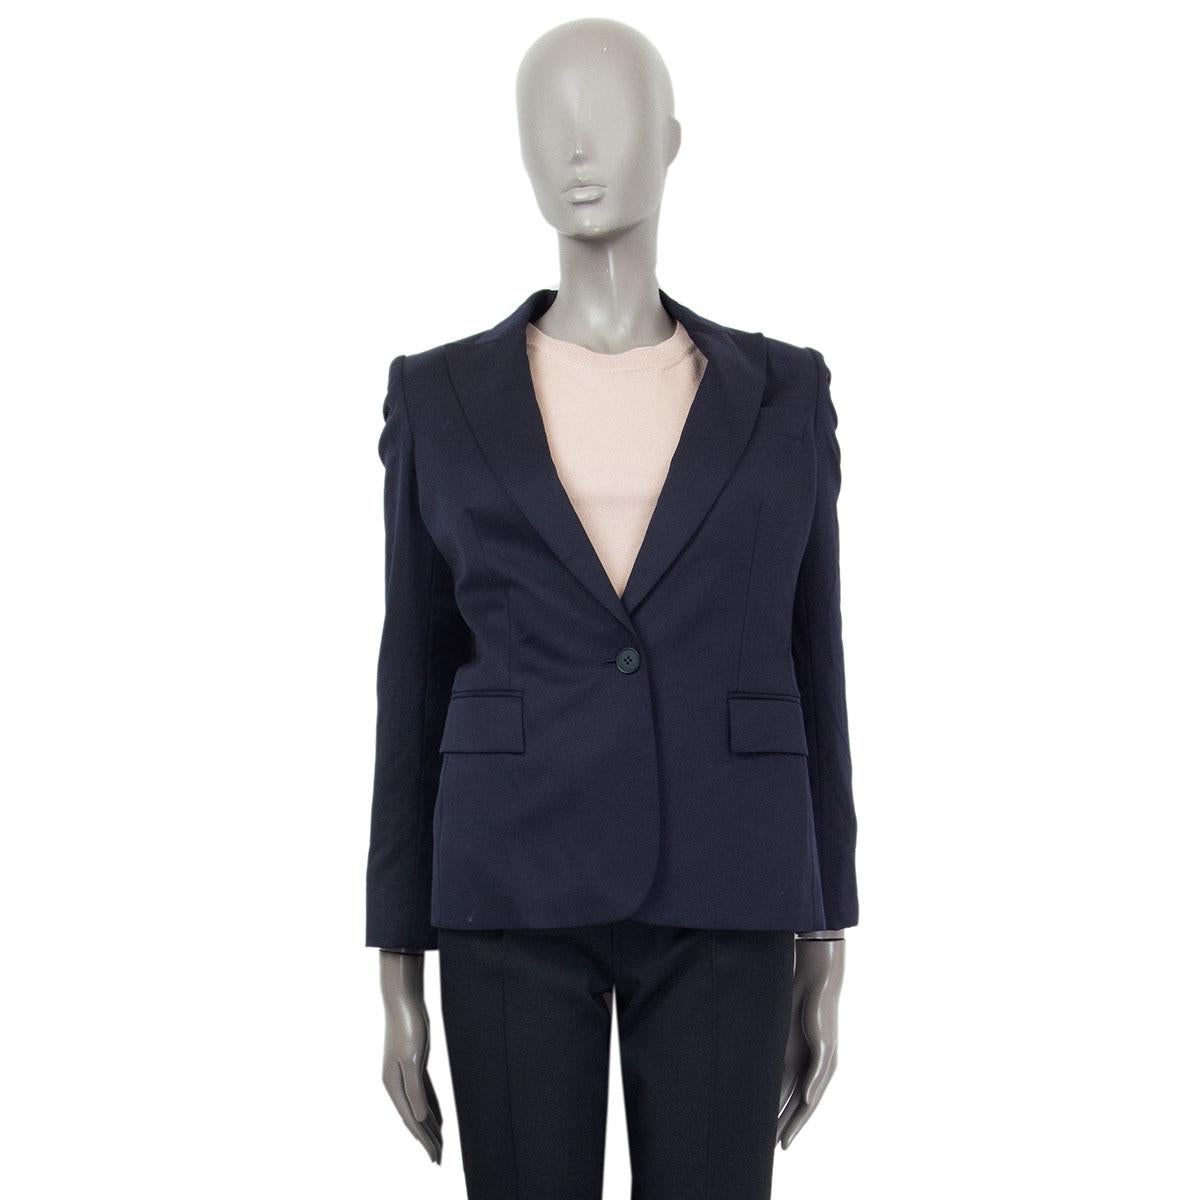 authentic Stella McCartney classic one-button blazer in midnight blue wool (100%). Lined in blue viscose (52%) and cotton (48%). Two flap pockets and one chest pocket. Has been worn and is in excellent condition. 

Tag Size 36
Size XXS
Shoulder